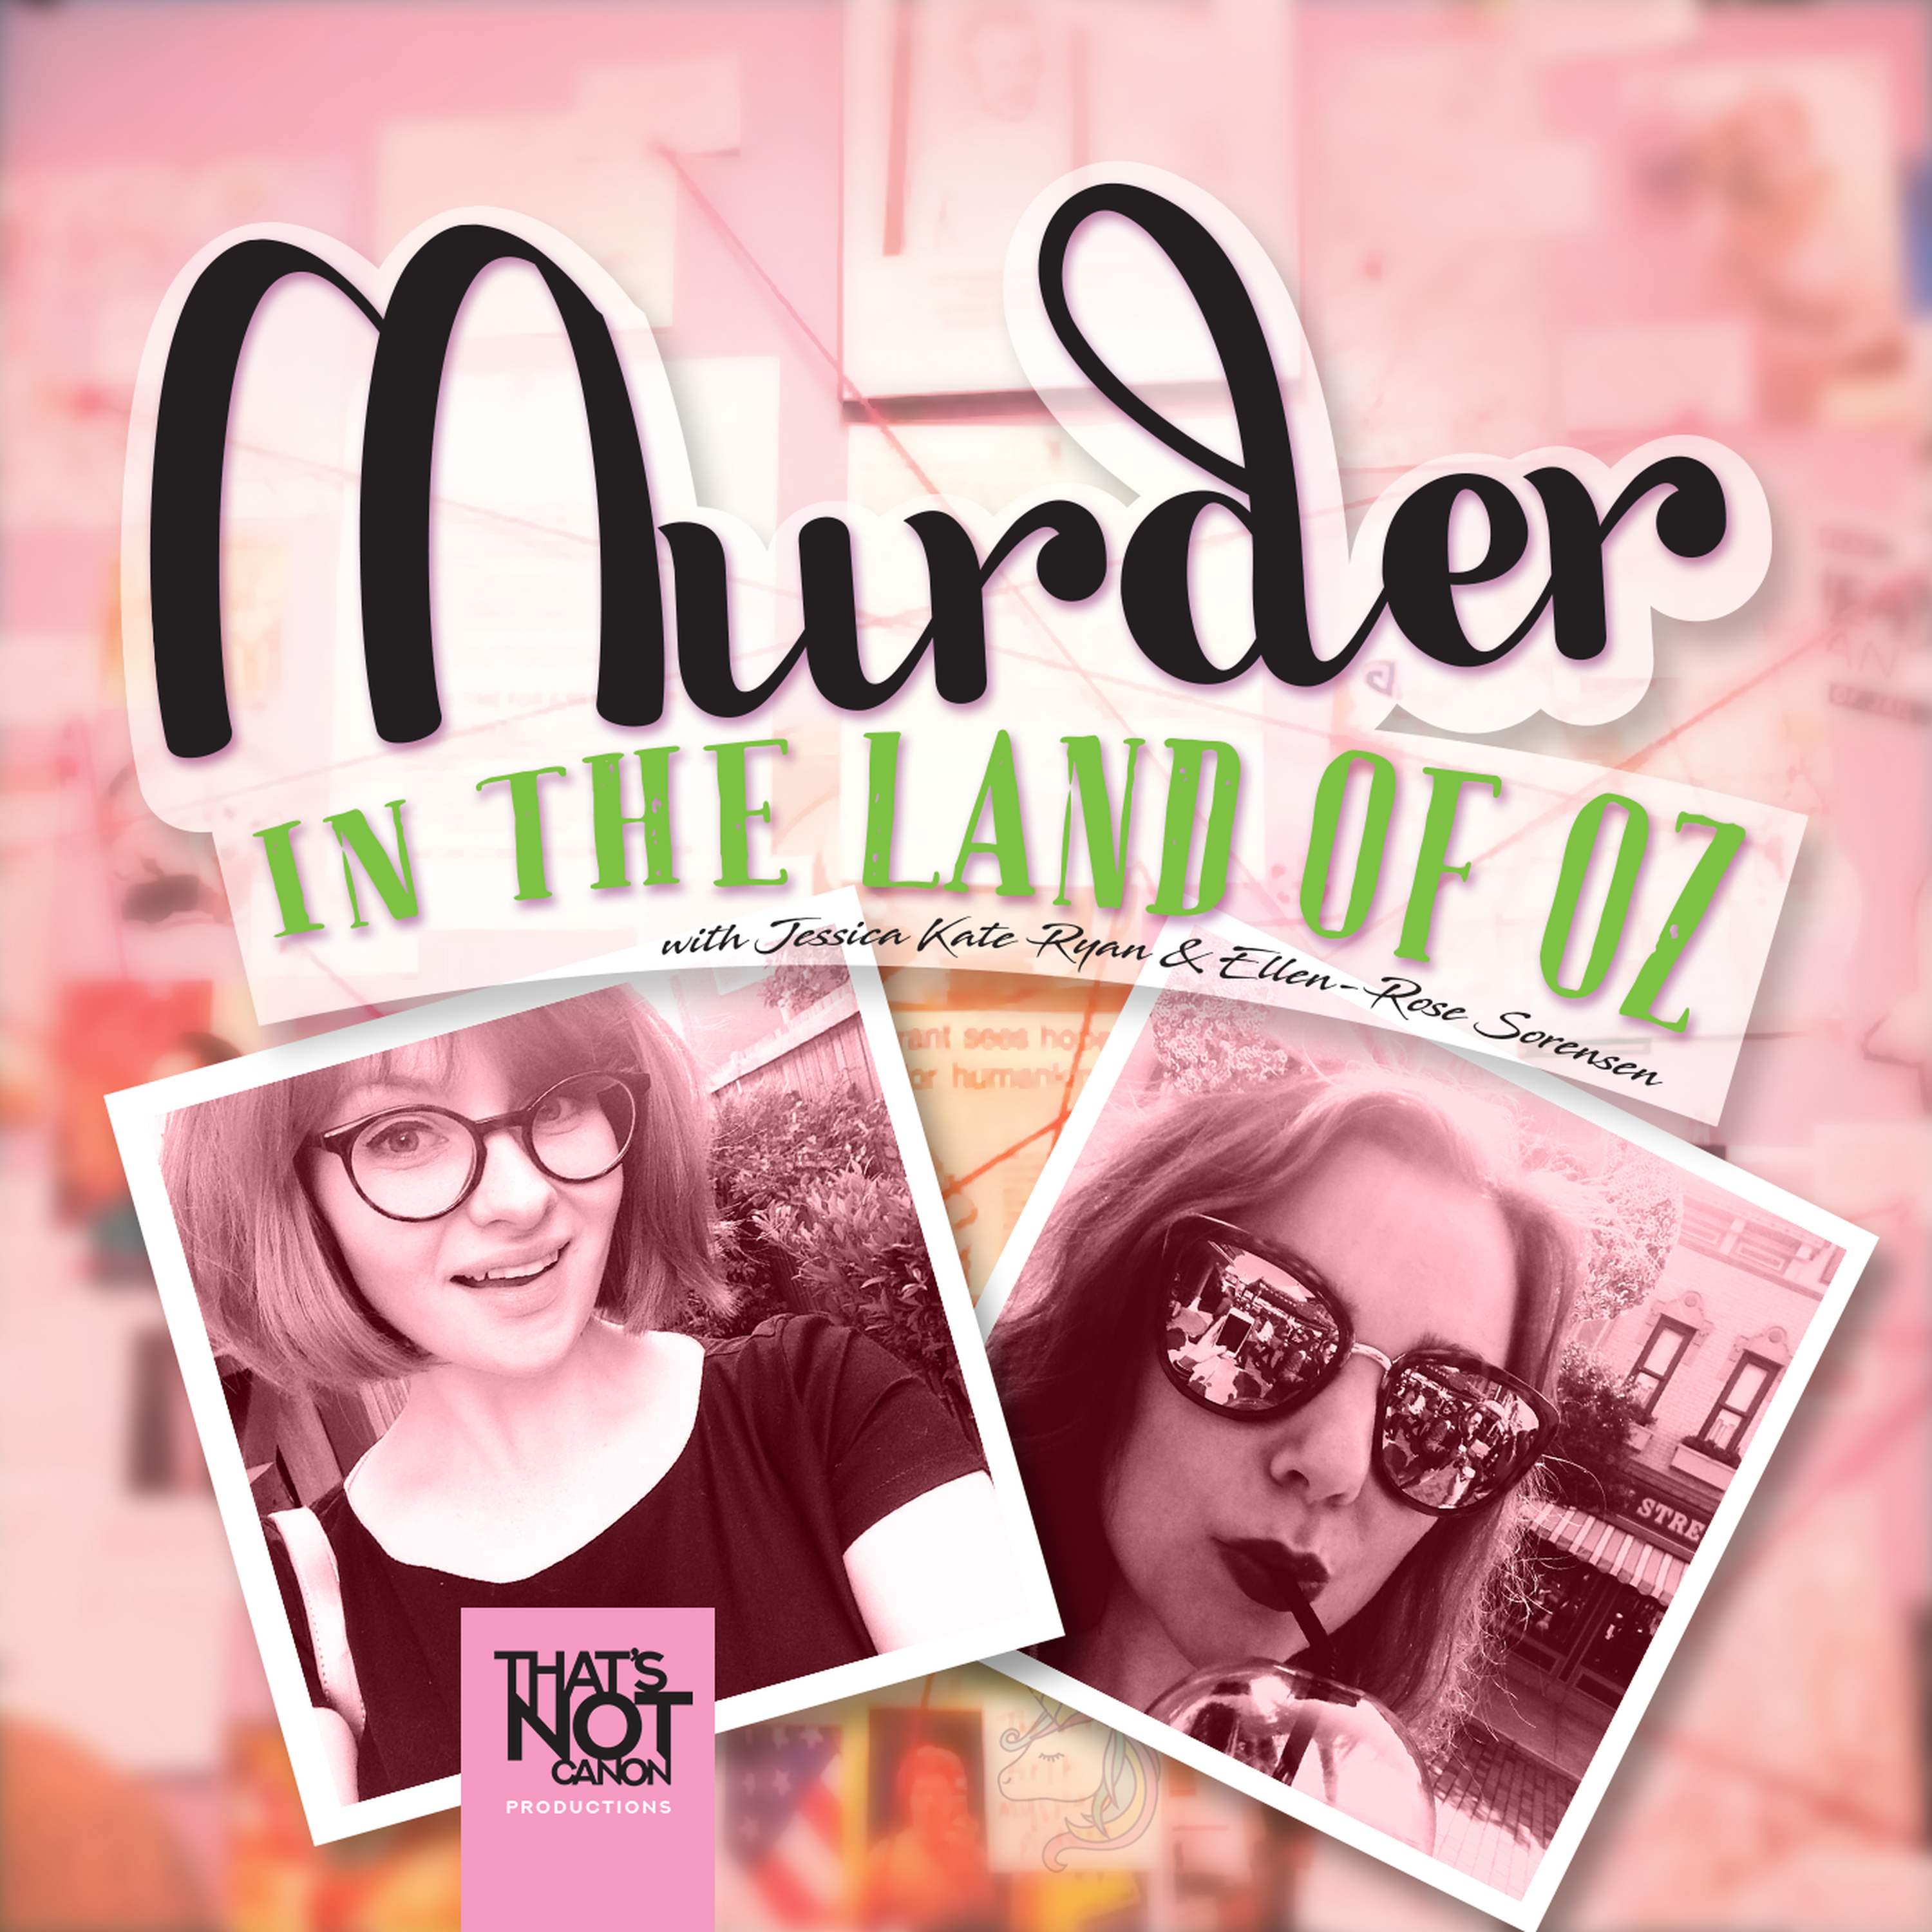 The Murder of Carly Ryan